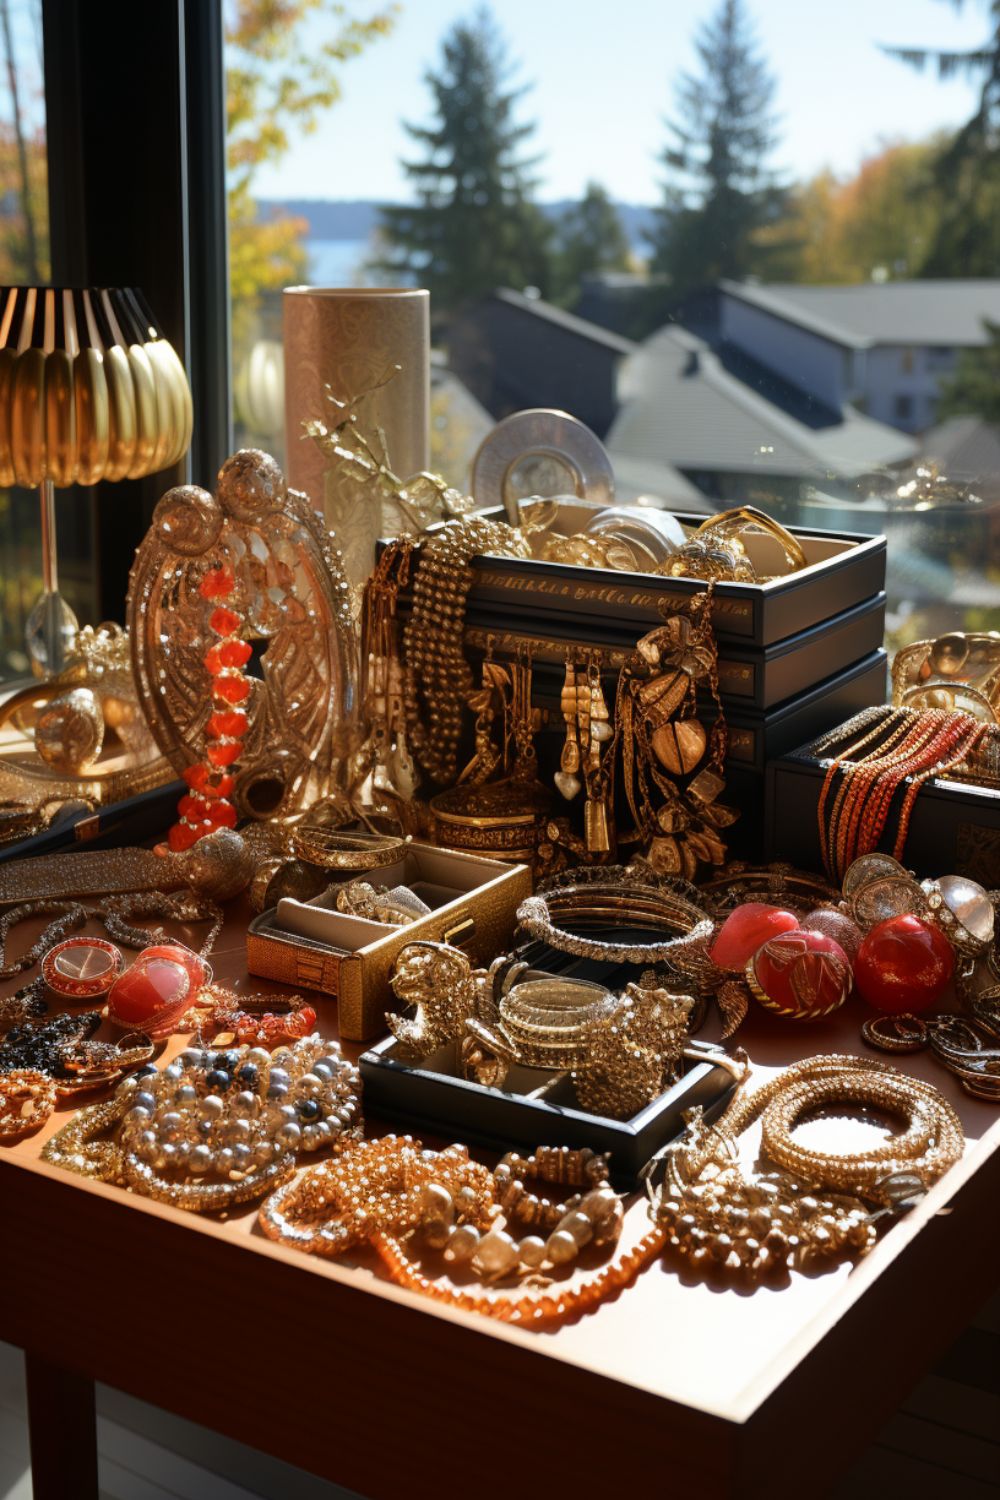 DIY Jewelry Overhaul by visiting an estate sale